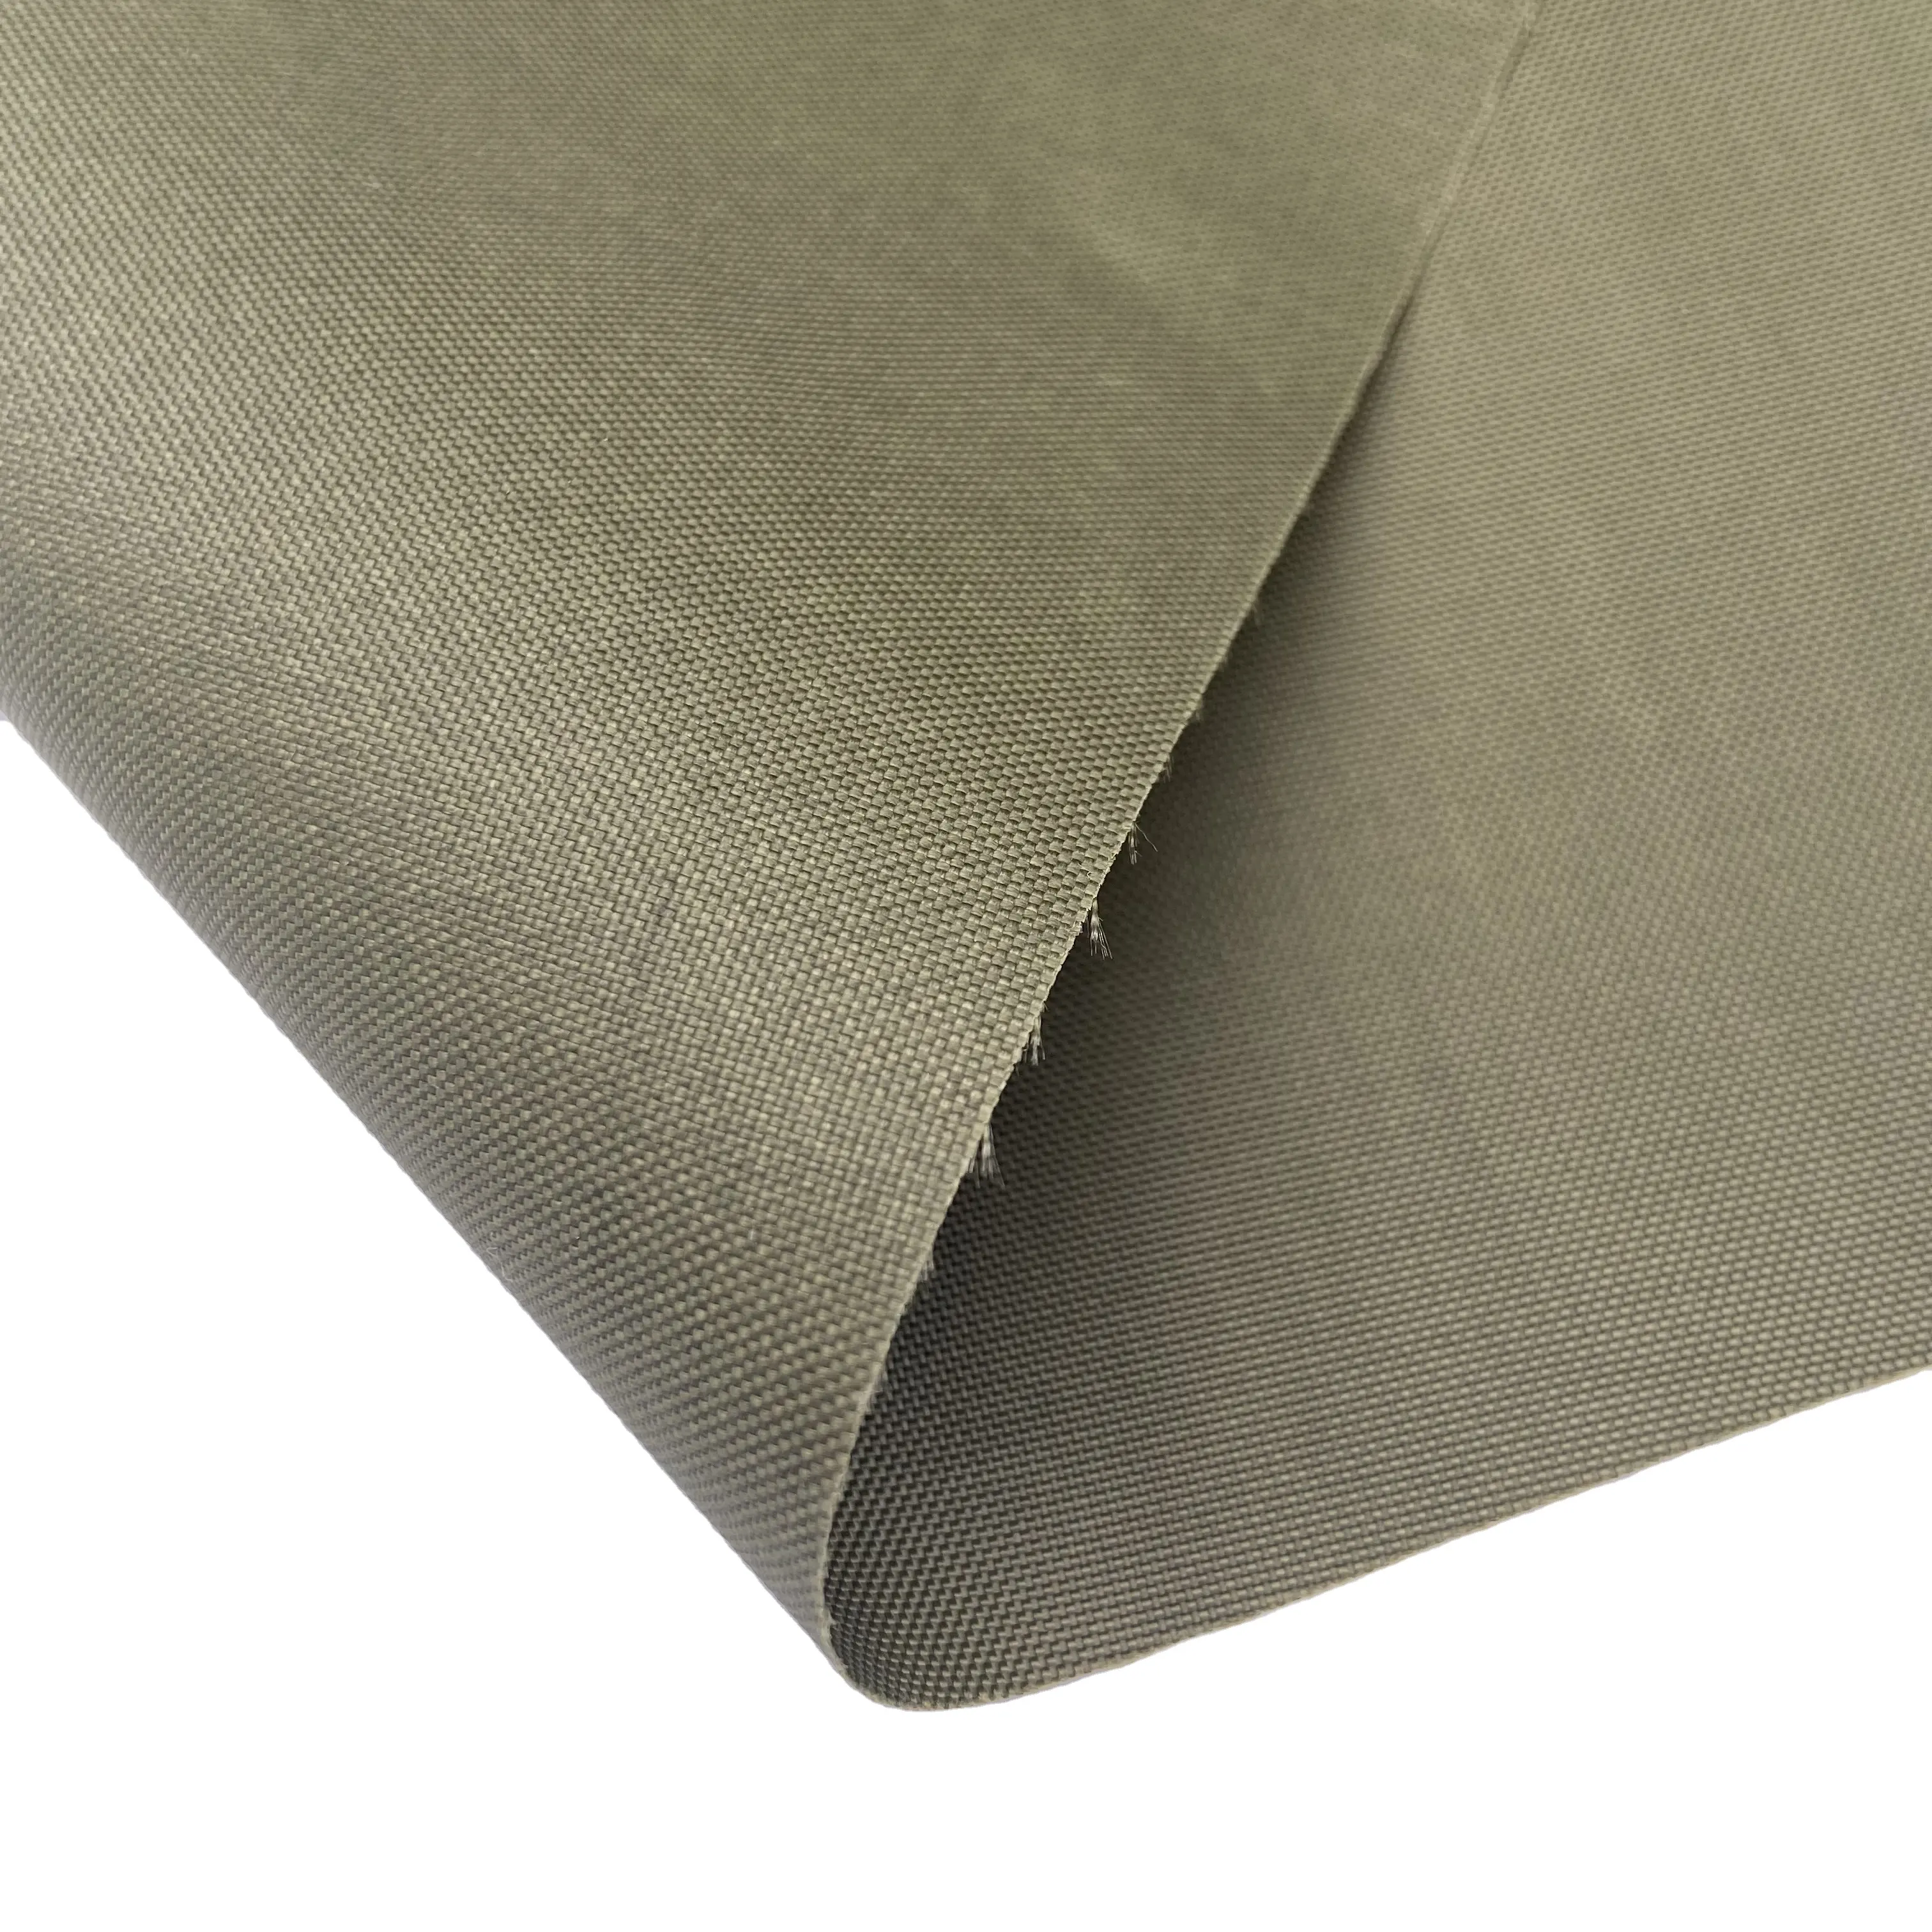 Oxford fabric polyester fabric waterproof 420d oxford fabric pvc/pu surface coating agent